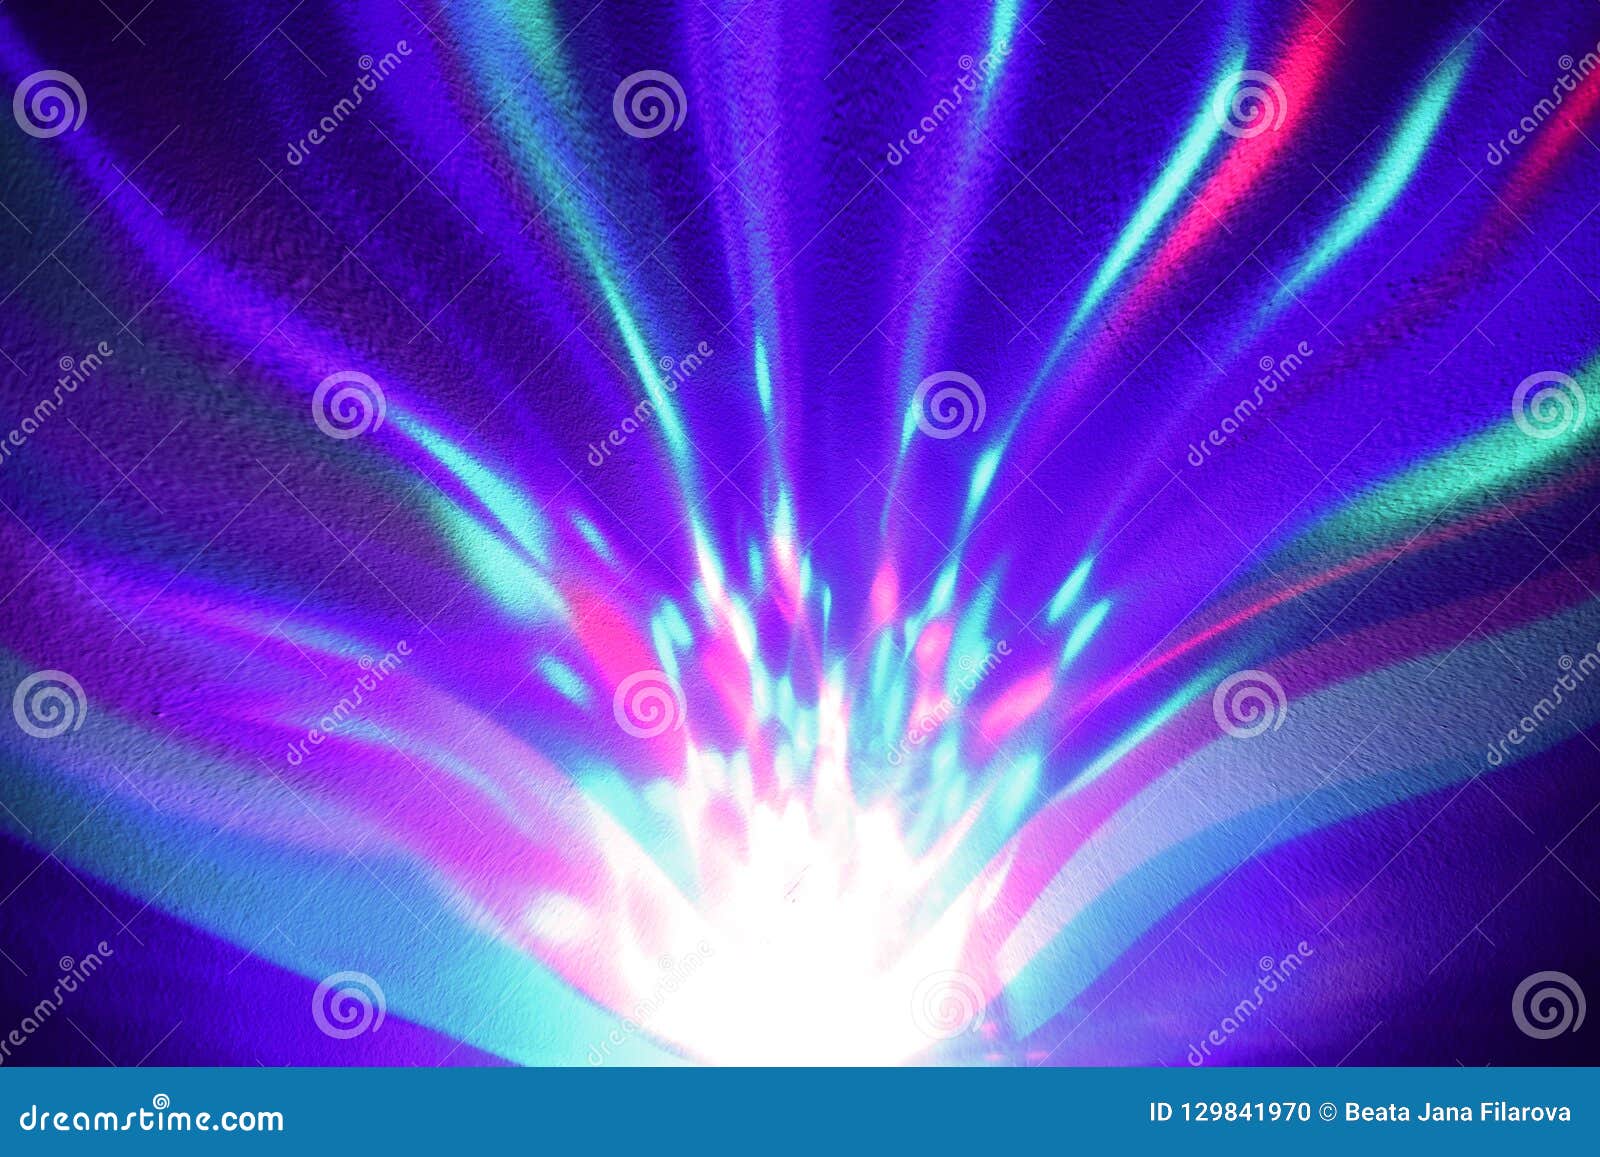 Blue Violet Abstract Background Stock Images Stock Illustration